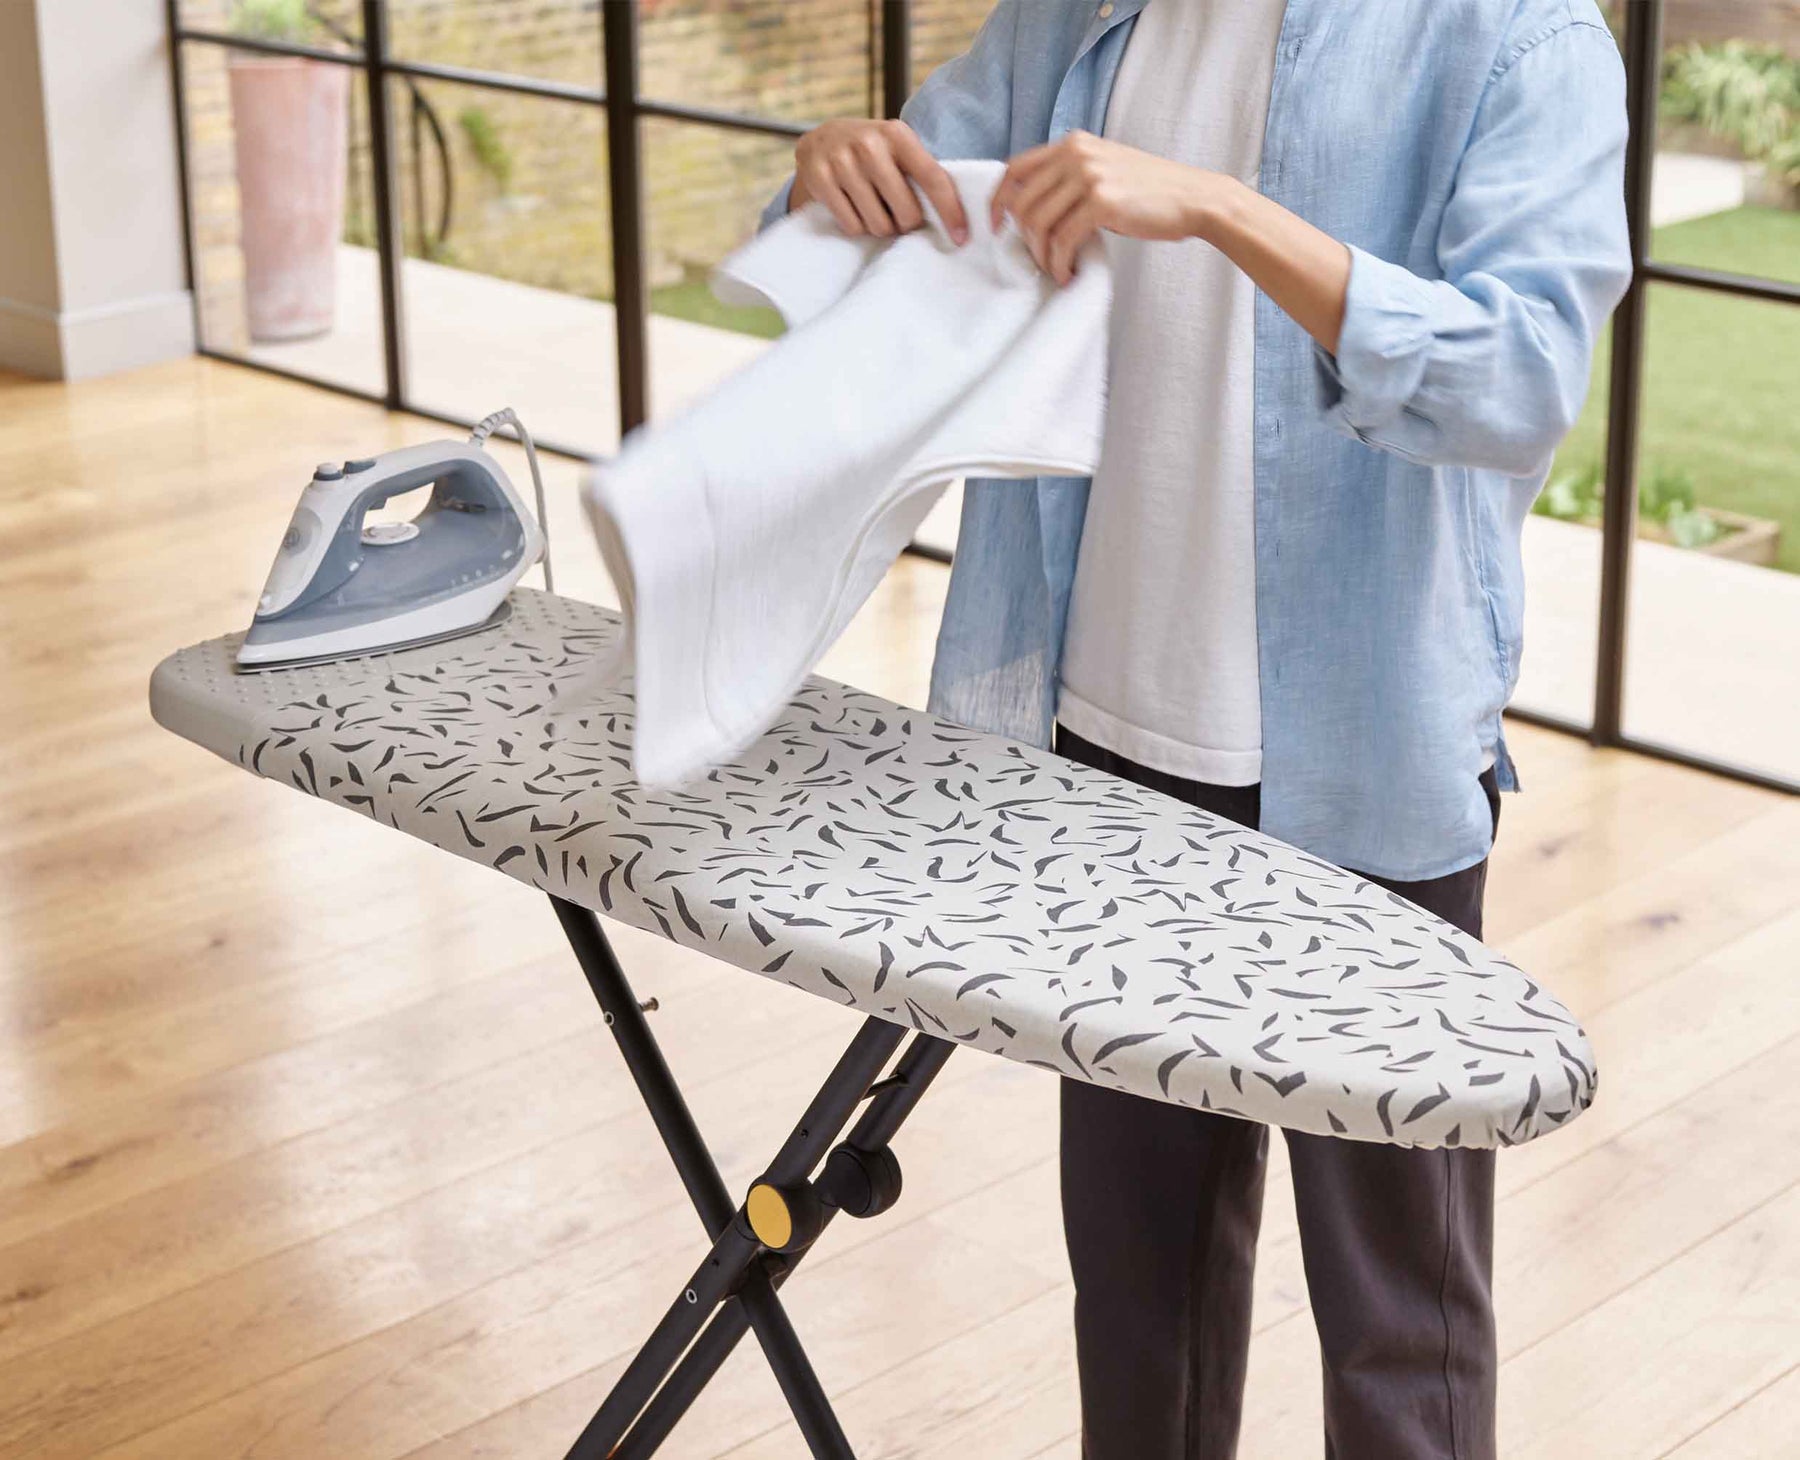 Glide Plus Easy-store Ironing Board with Advanced Cover - 50032 - Image 3